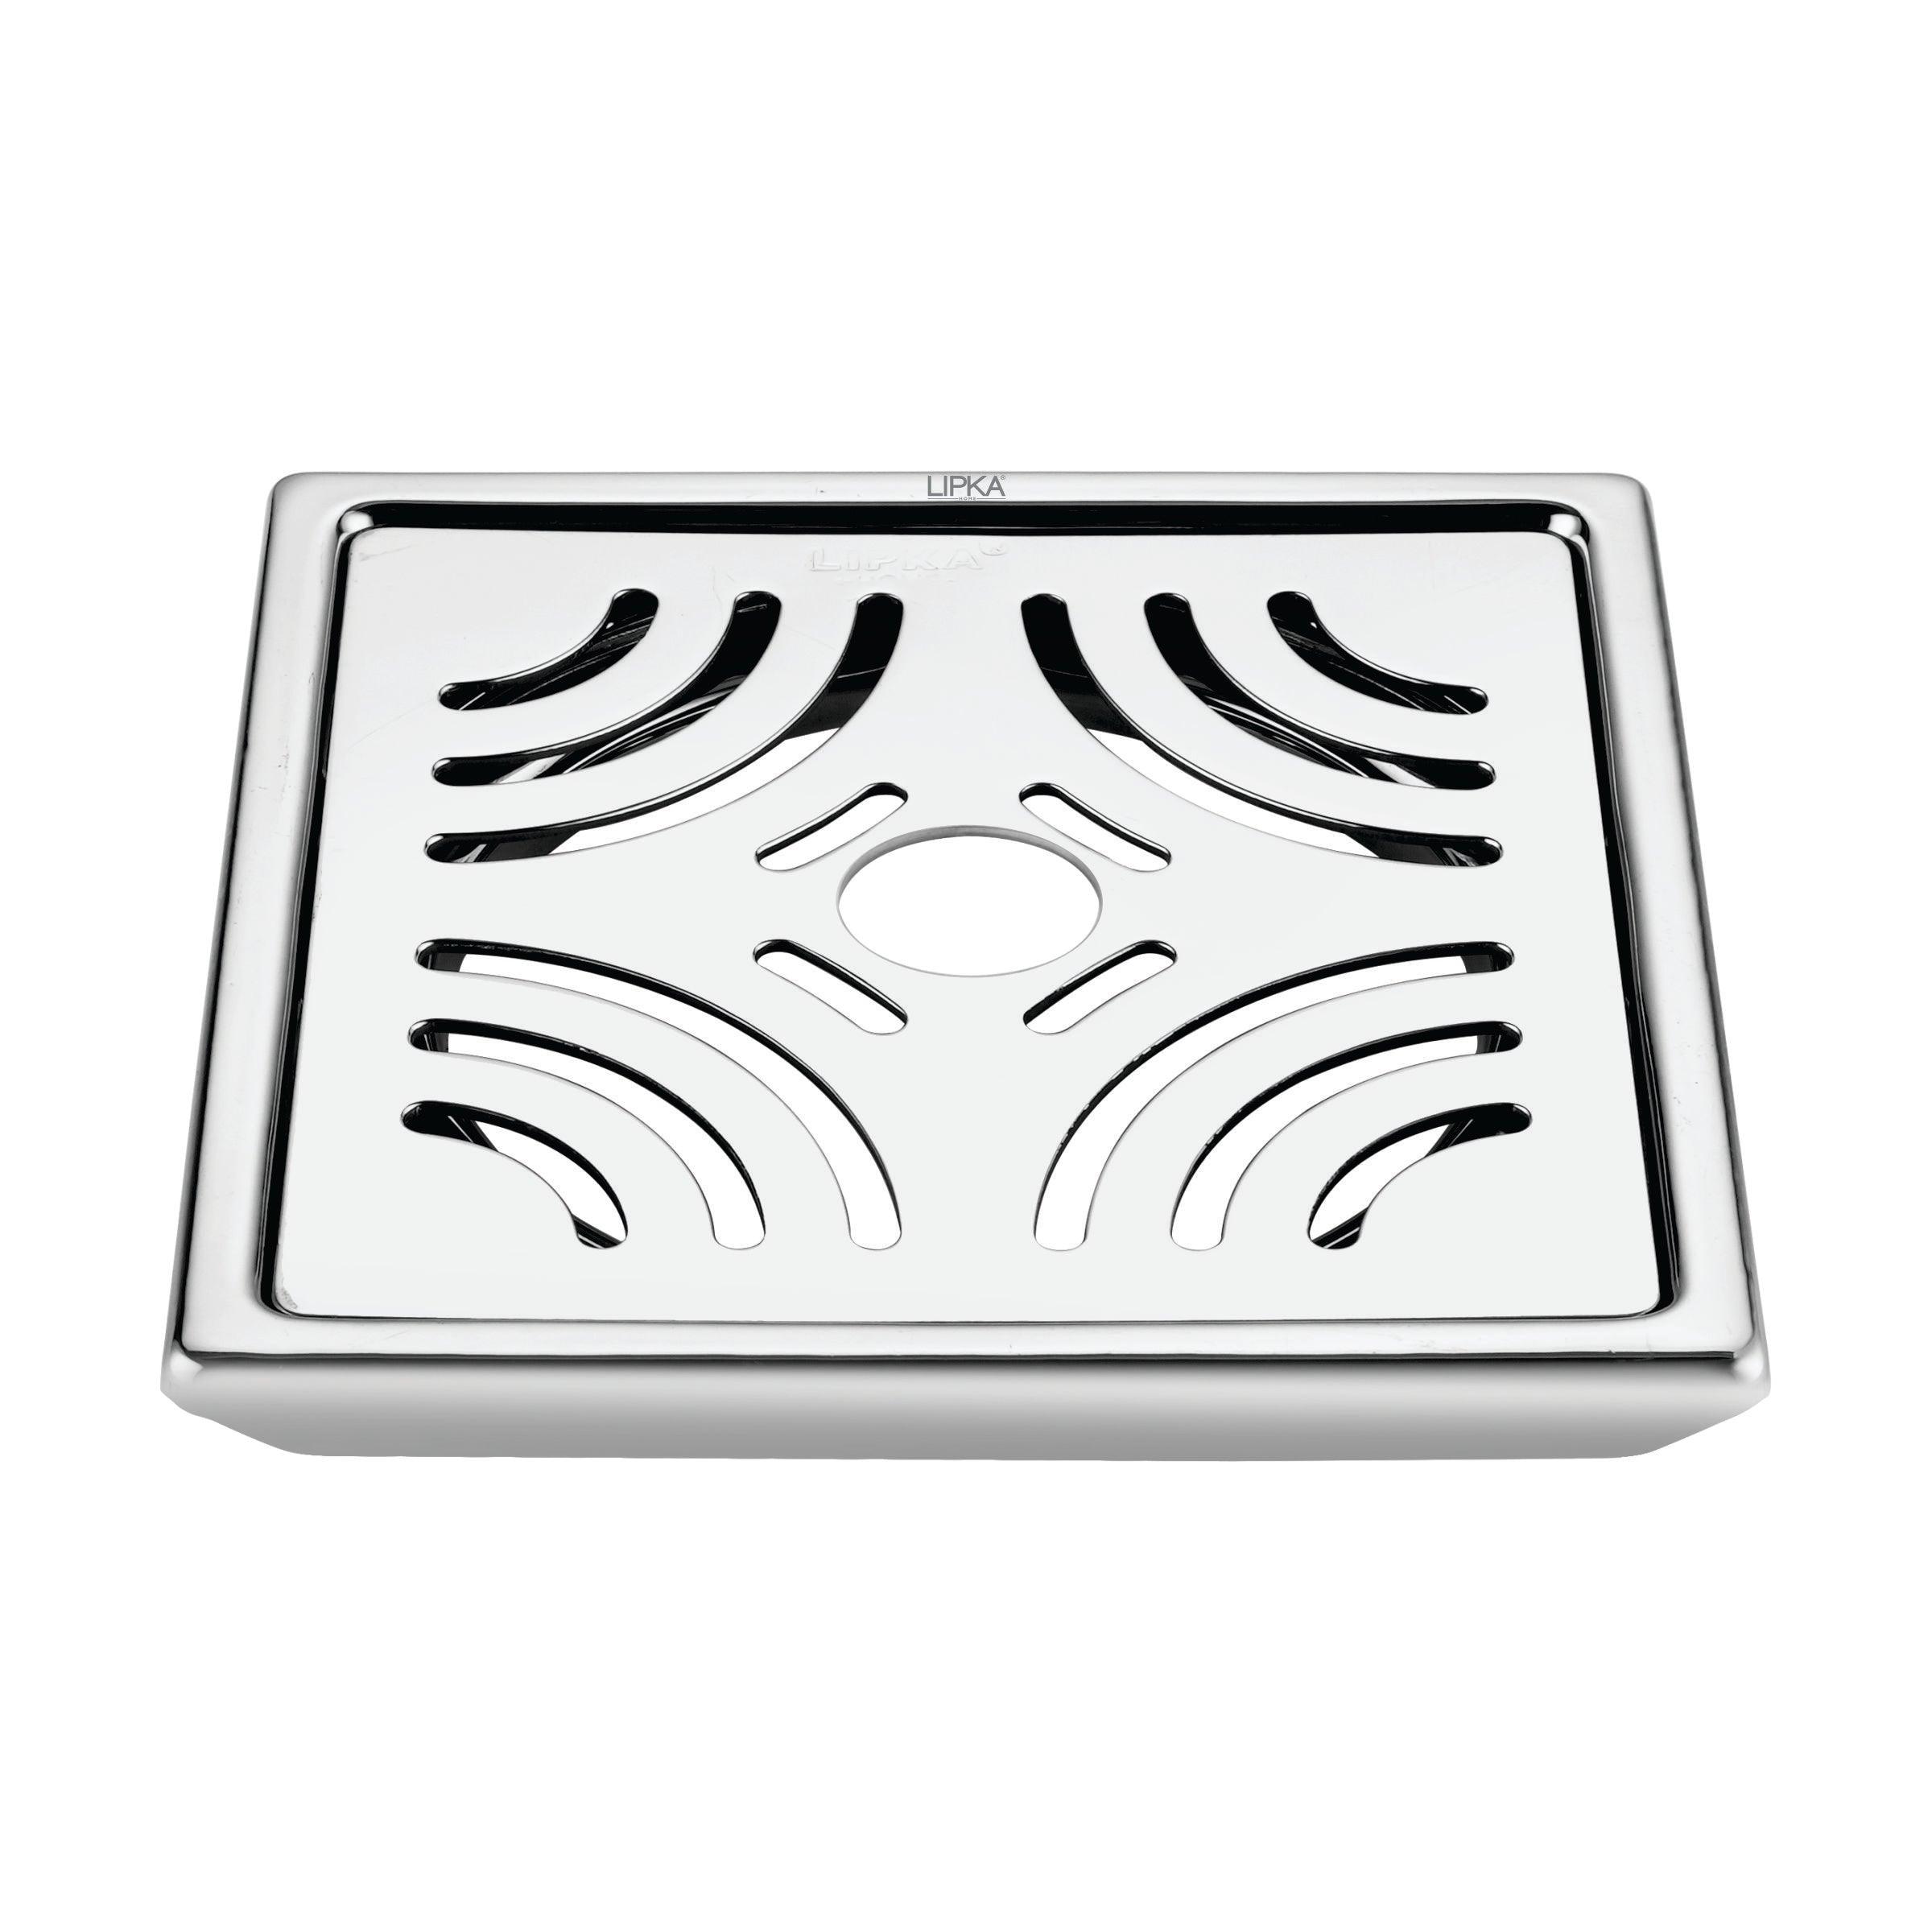 Gamma Deluxe Square Floor Drain (6 x 6 Inches) with Hole